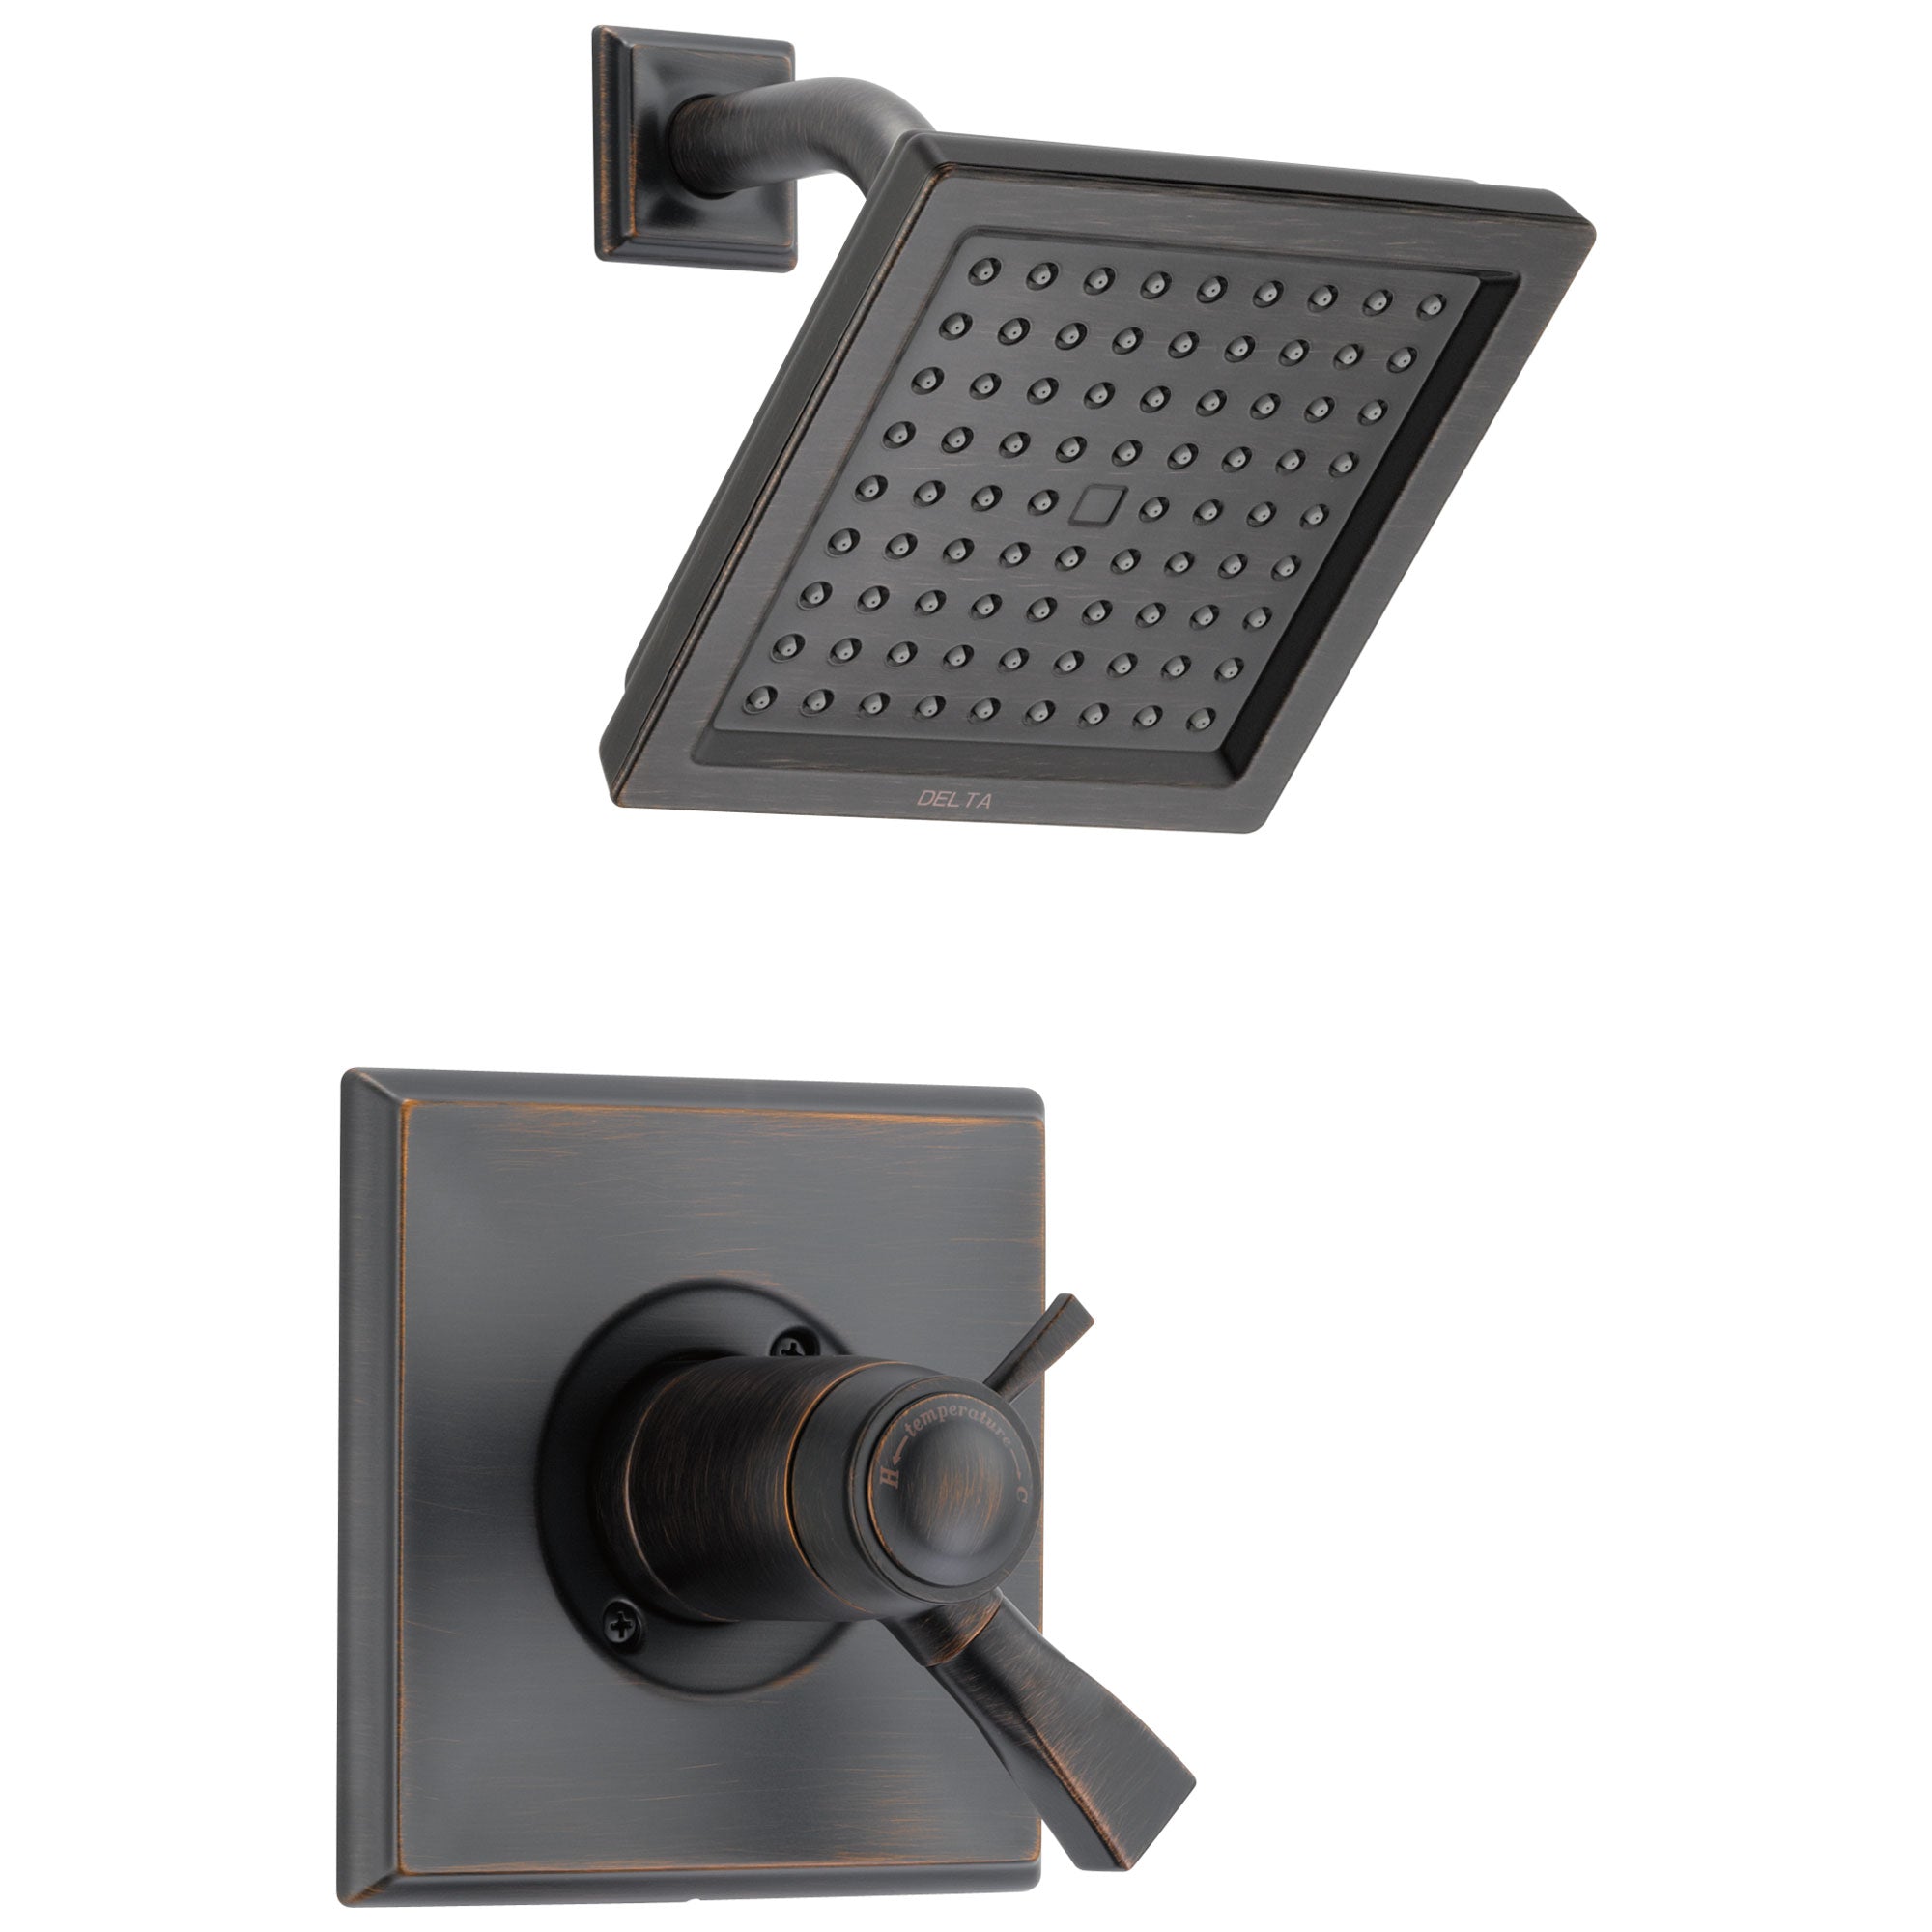 Delta Dryden Collection Venetian Bronze 1.75 GPM Thermostatic Dual Temp / Pressure Control Shower only Faucet Trim (Requires Valve) DT17T251RBWE